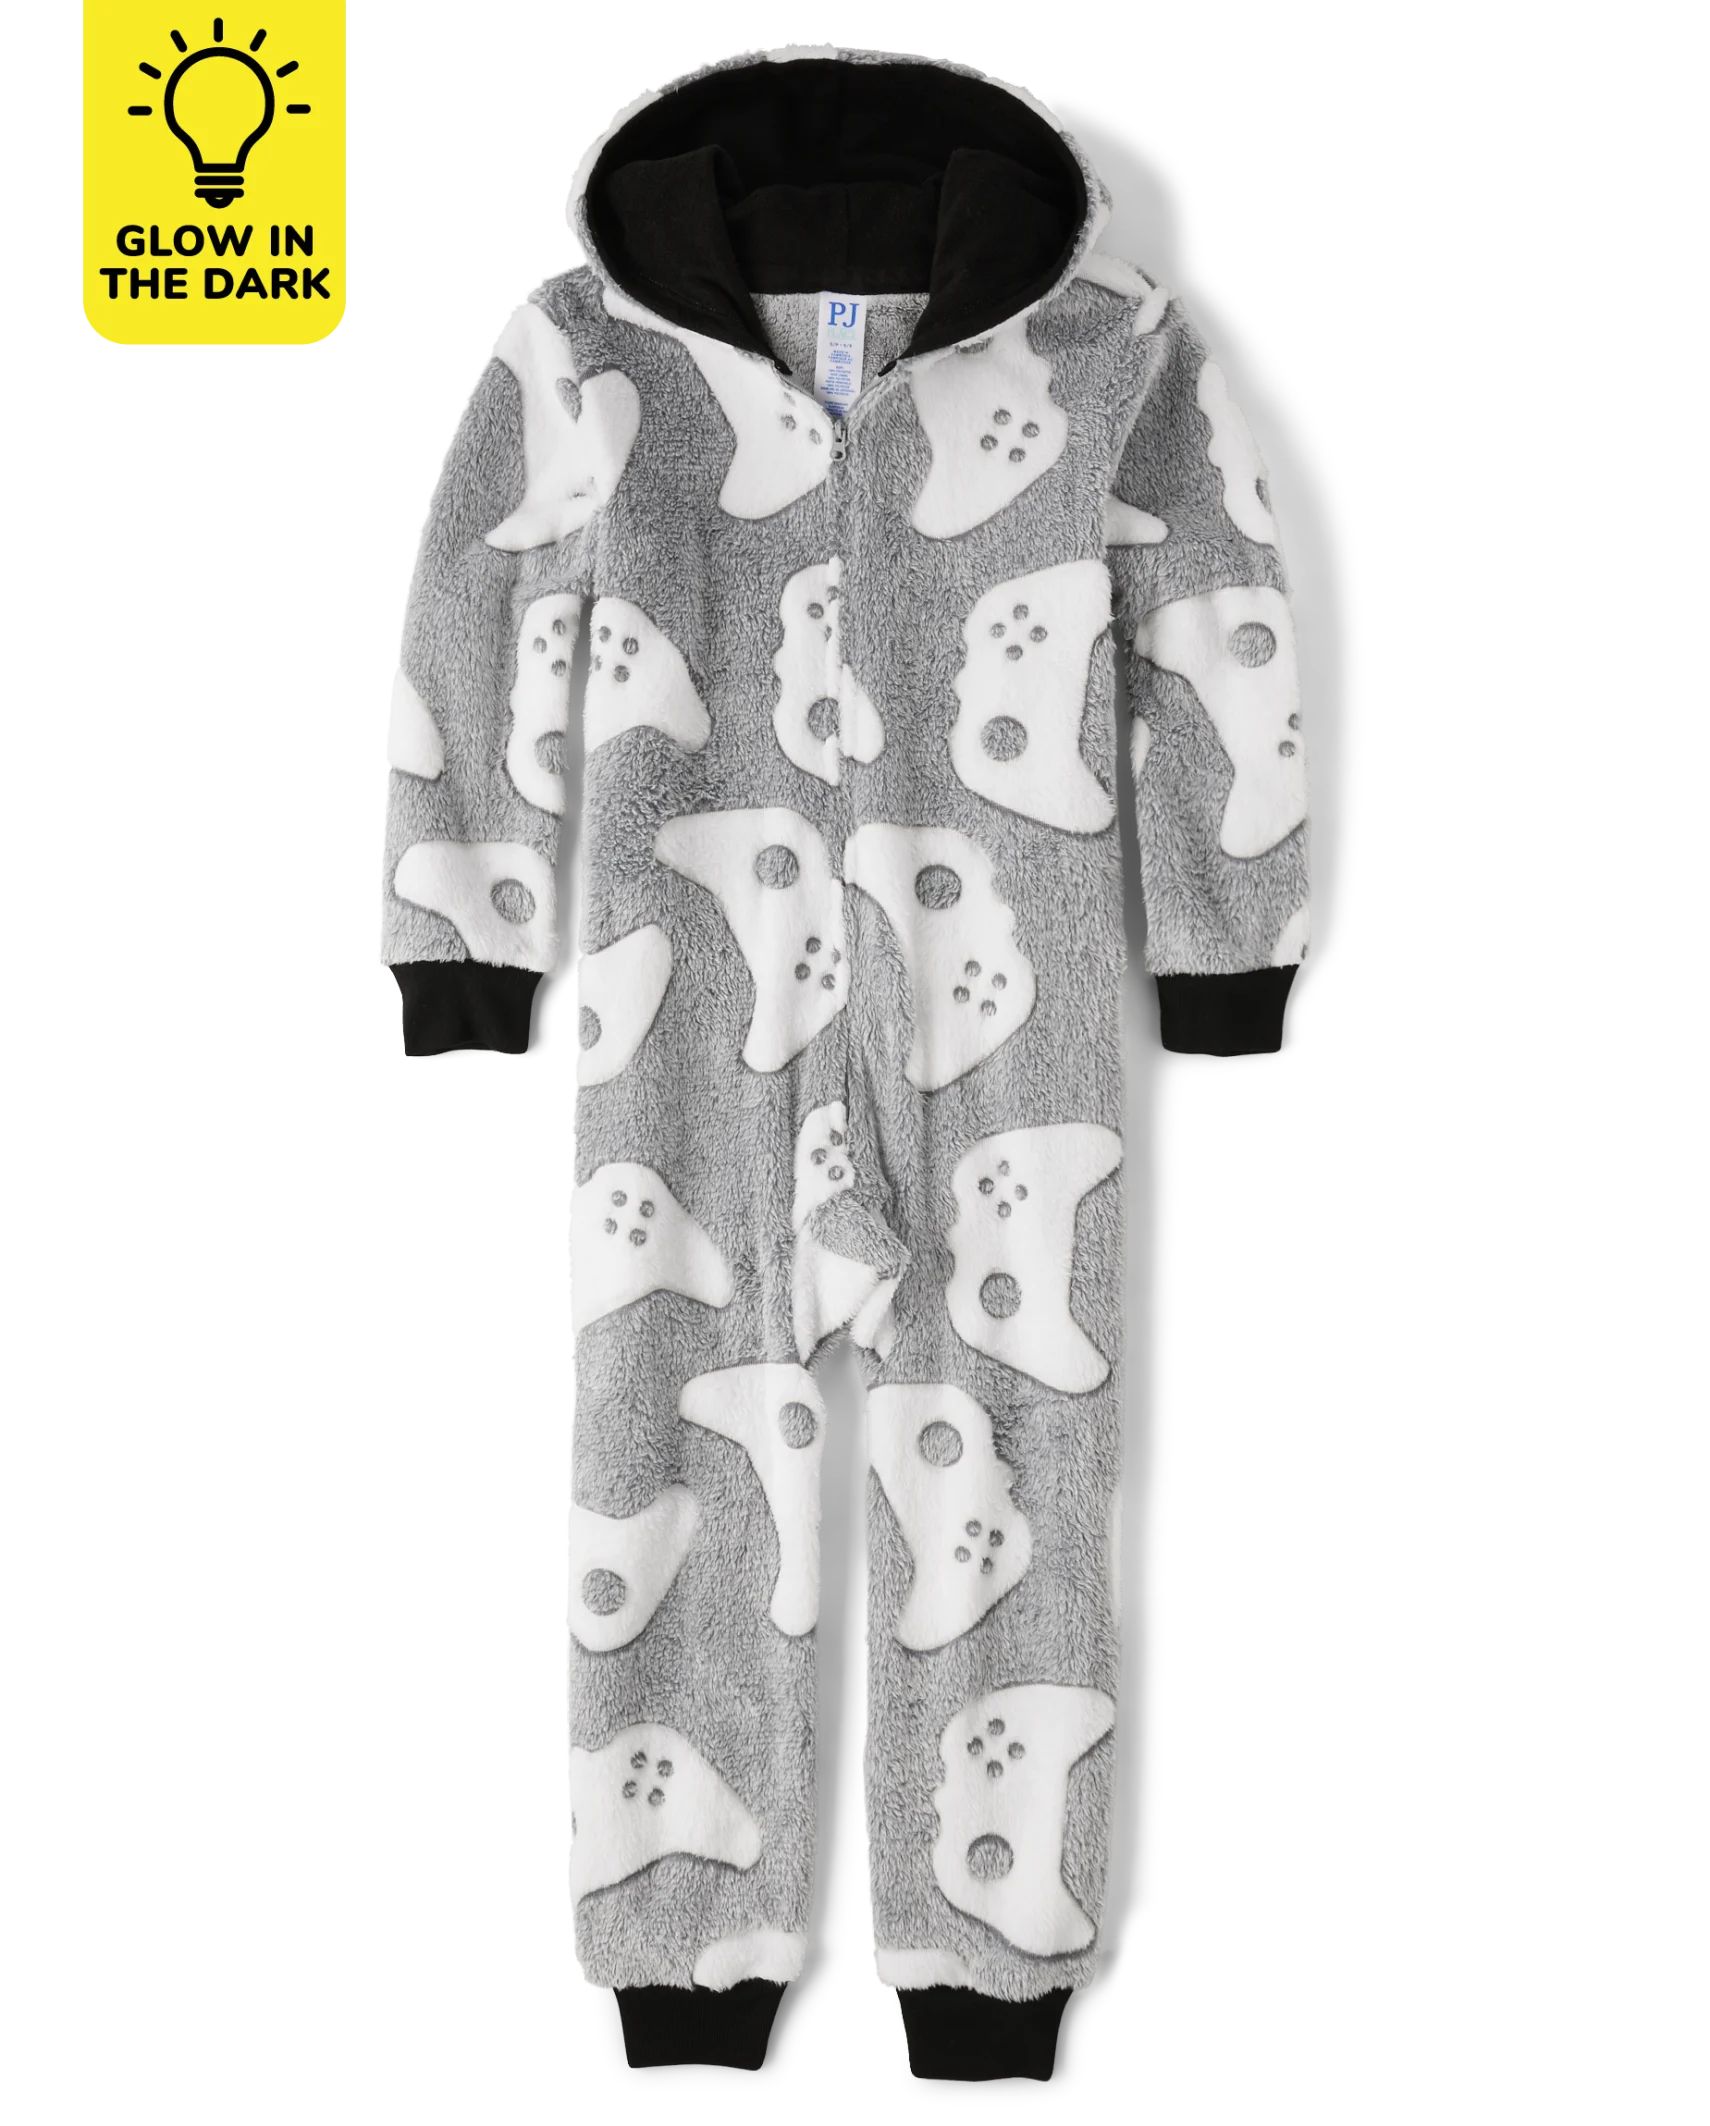 Boys Glow Gamer Sherpa One Piece Pajamas - fin gray | The Children's Place